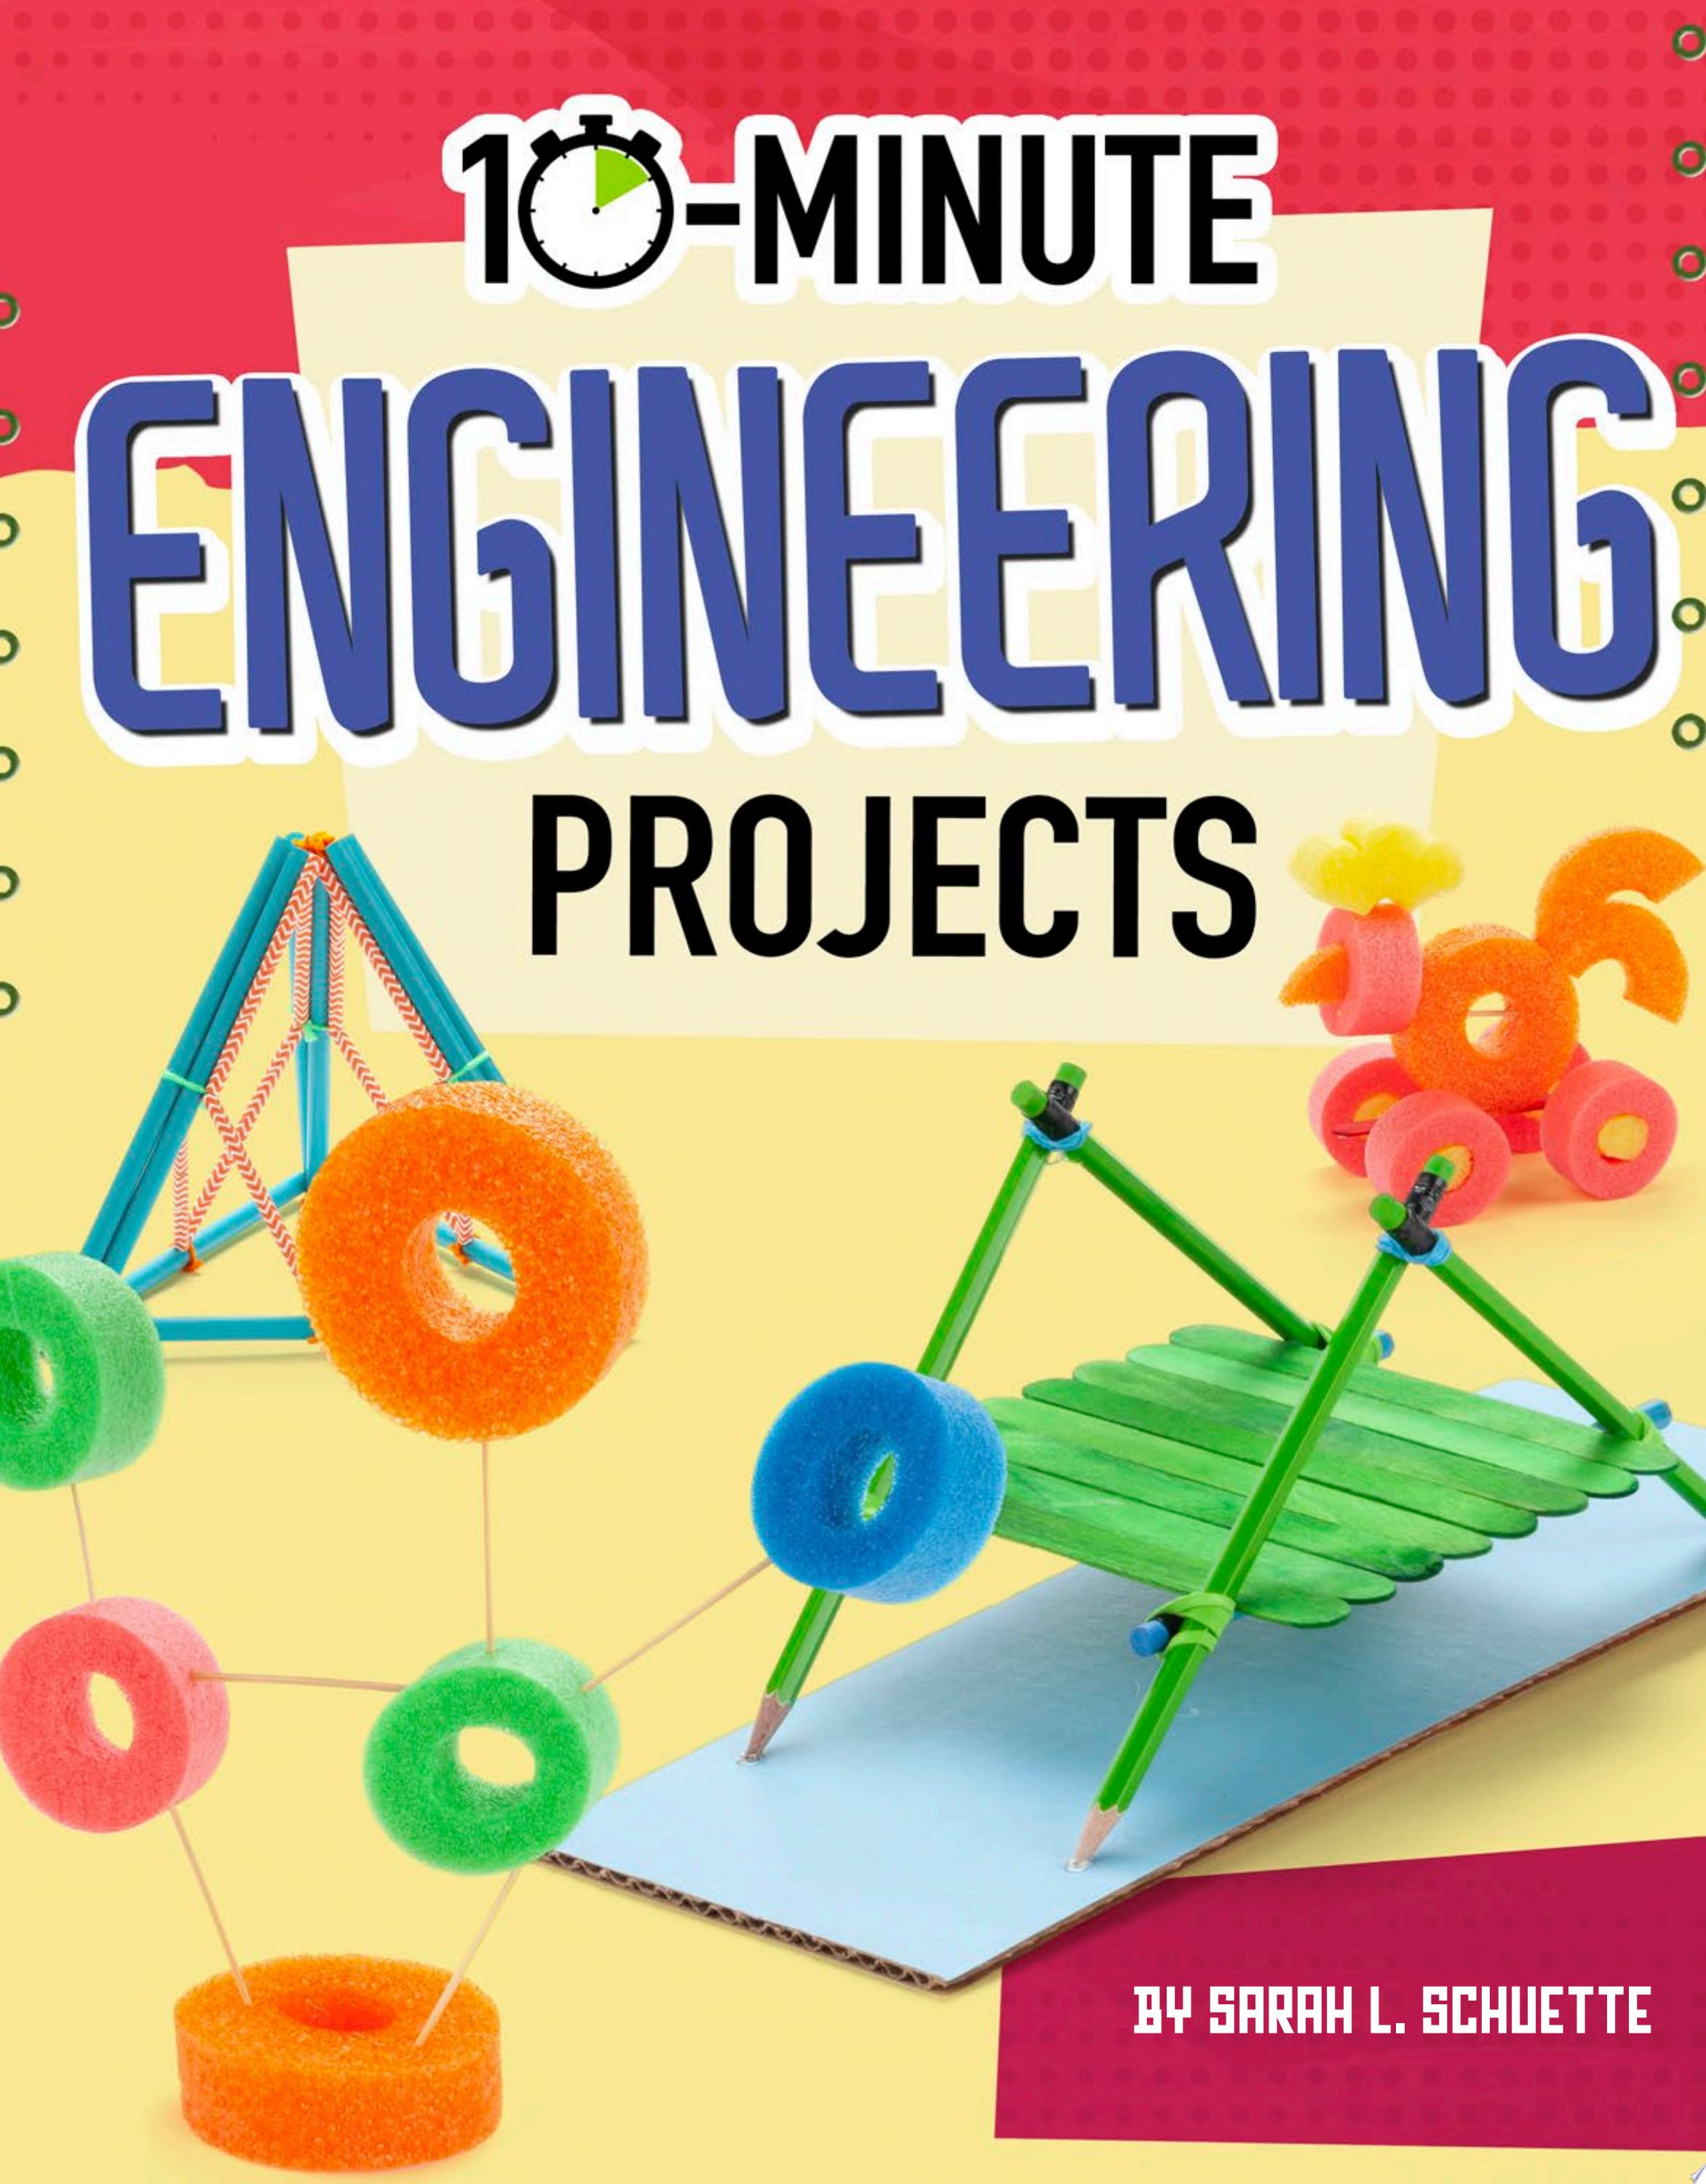 Image for "10-Minute Engineering Projects"